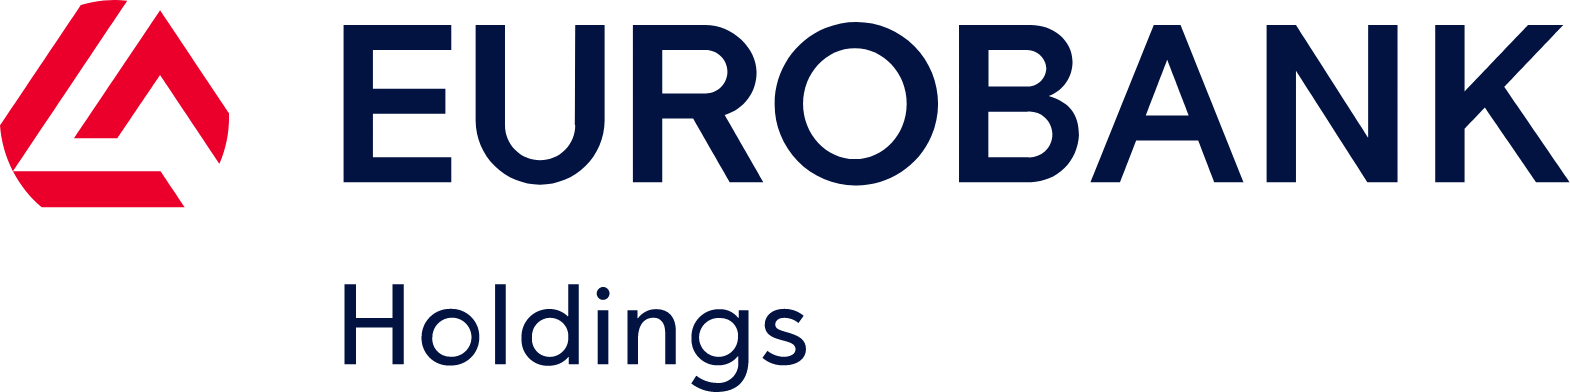 Eurobank Ergasias Services and Holdings logo large (transparent PNG)